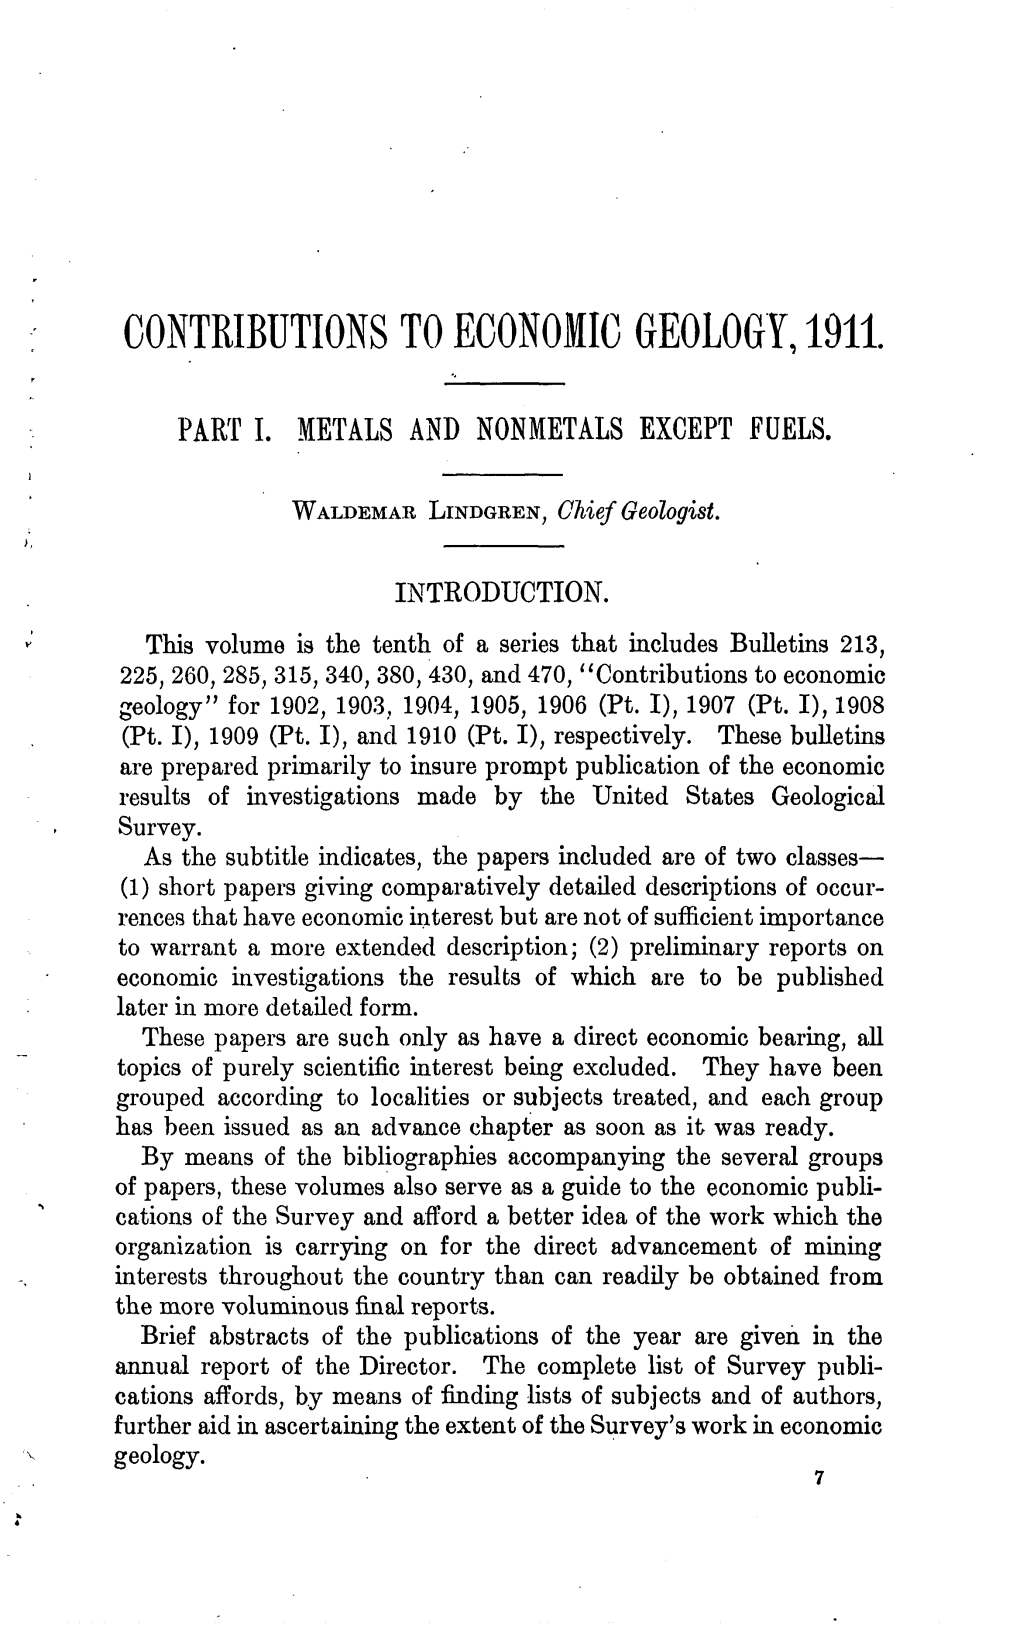 Contributions to Economic Geology, 1911